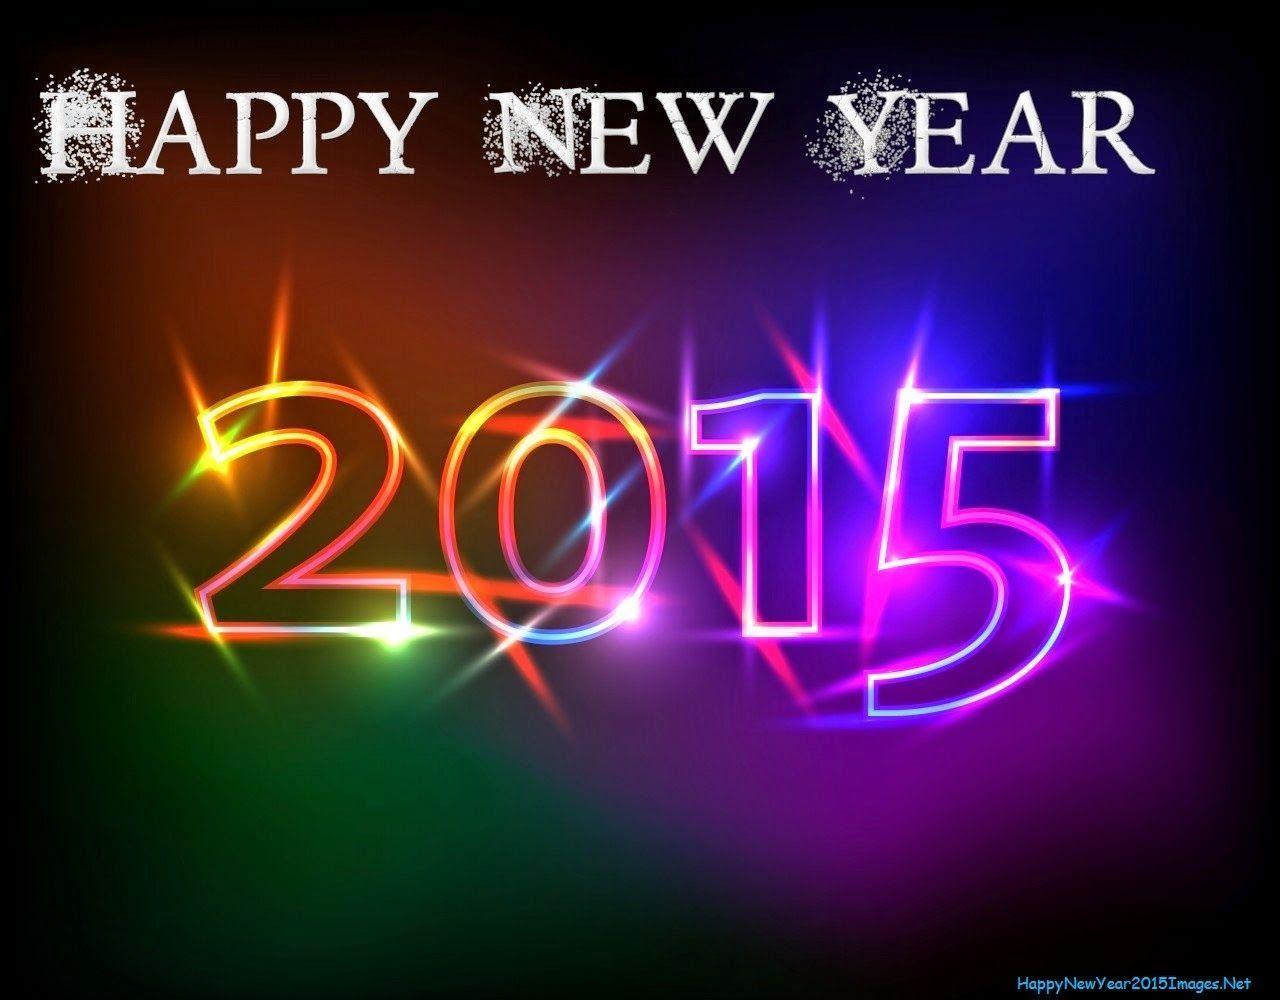 Happy New Year 2015 wallpaper and photo. HD Wallpaper 2015